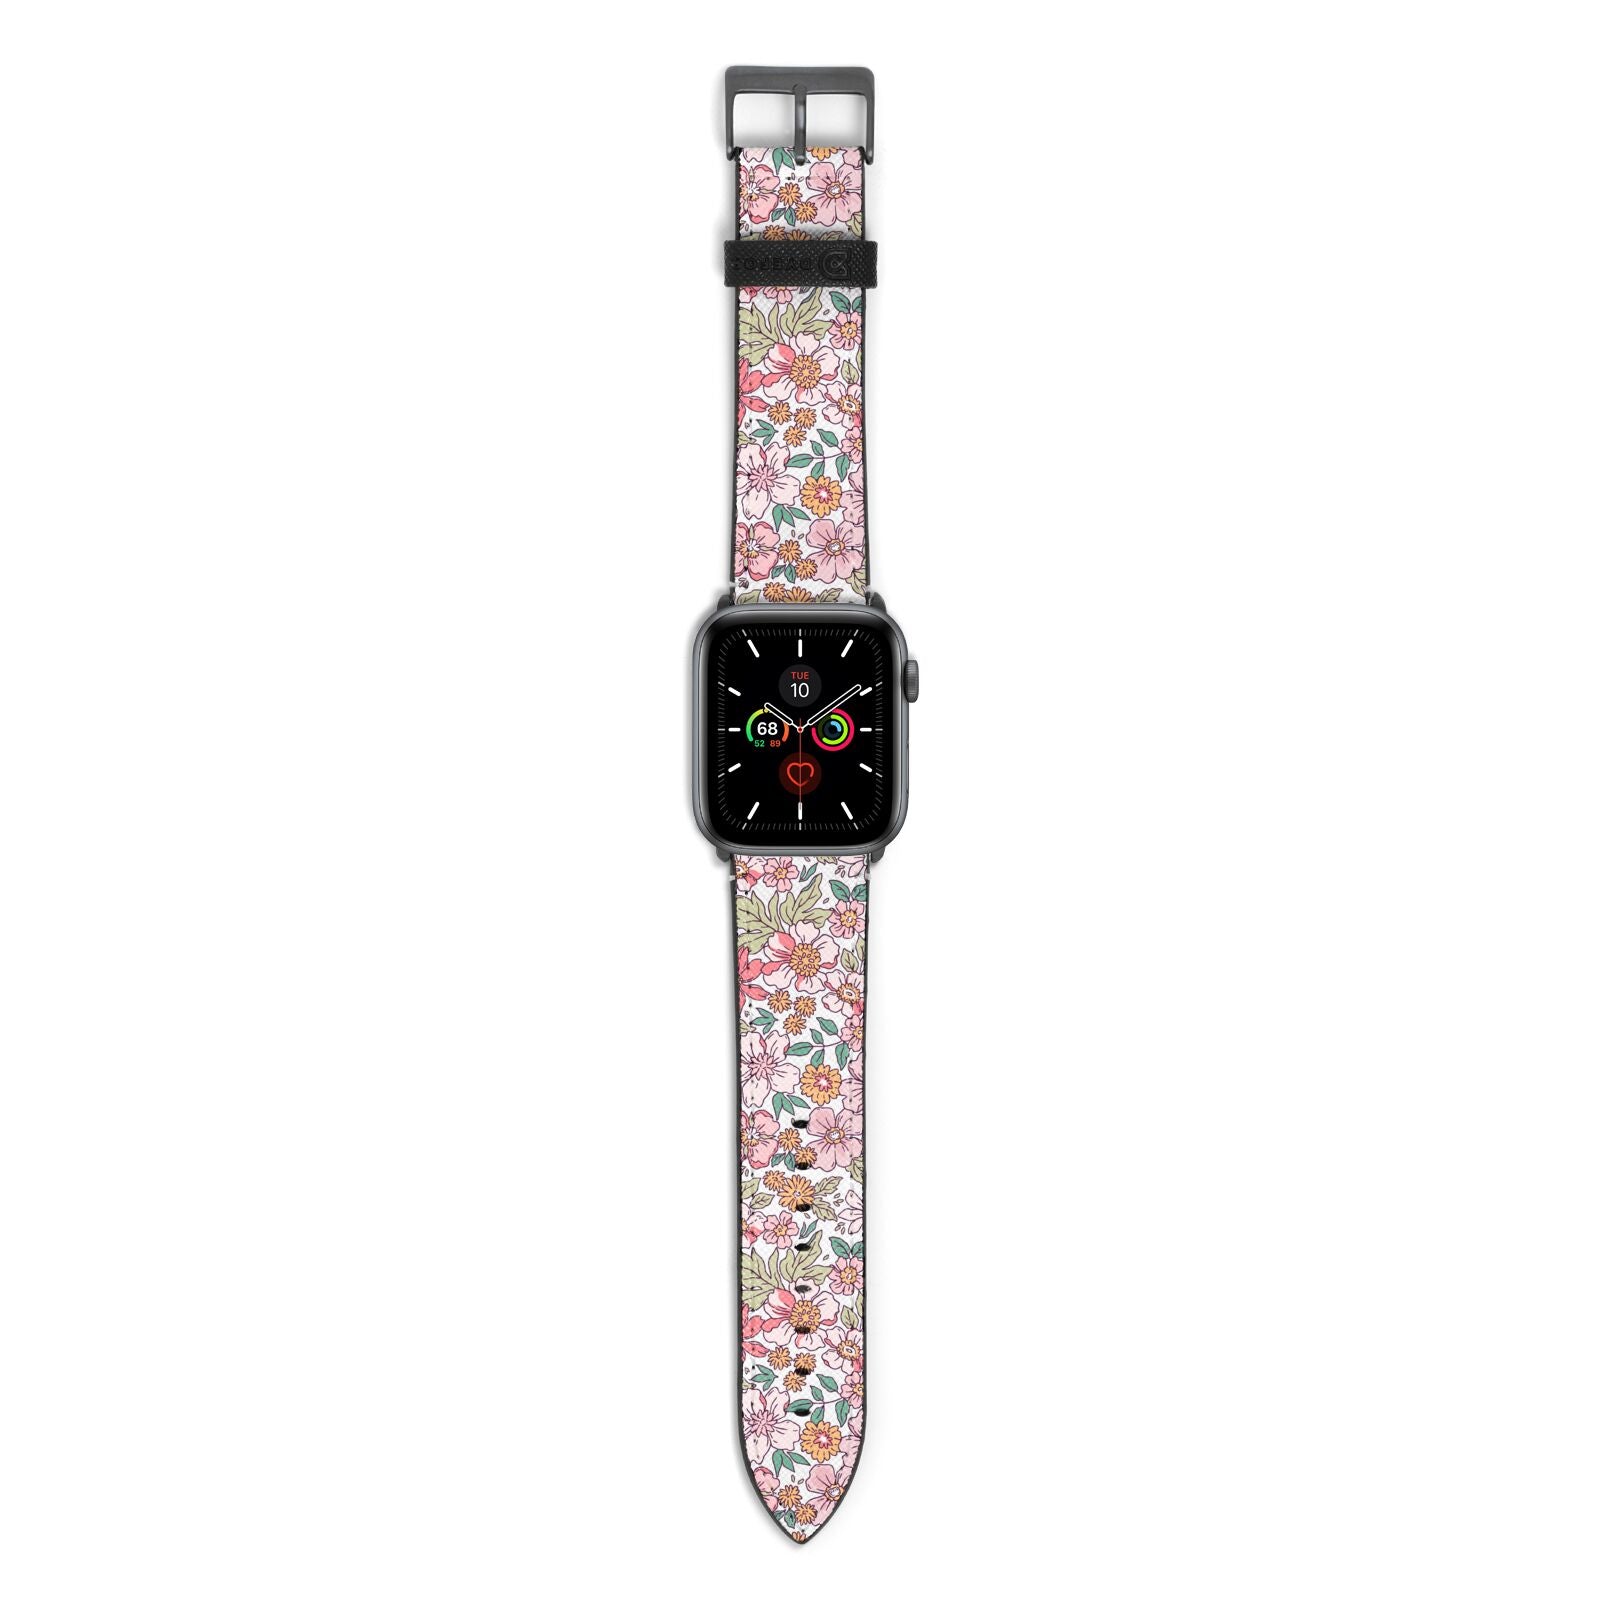 Small Floral Pattern Apple Watch Strap with Space Grey Hardware